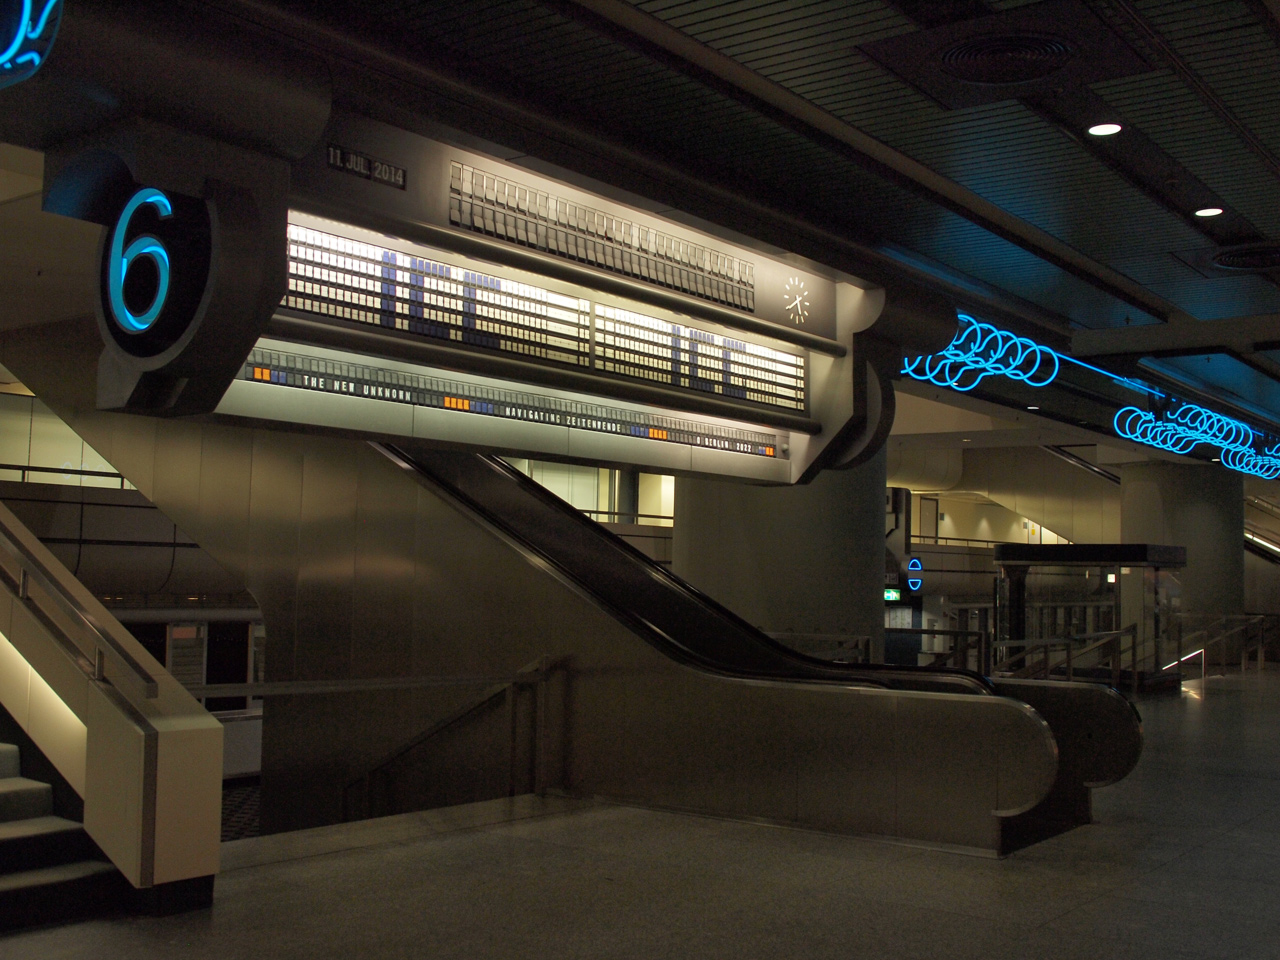 An information board and blue neon lights inside the ICC Berlin.